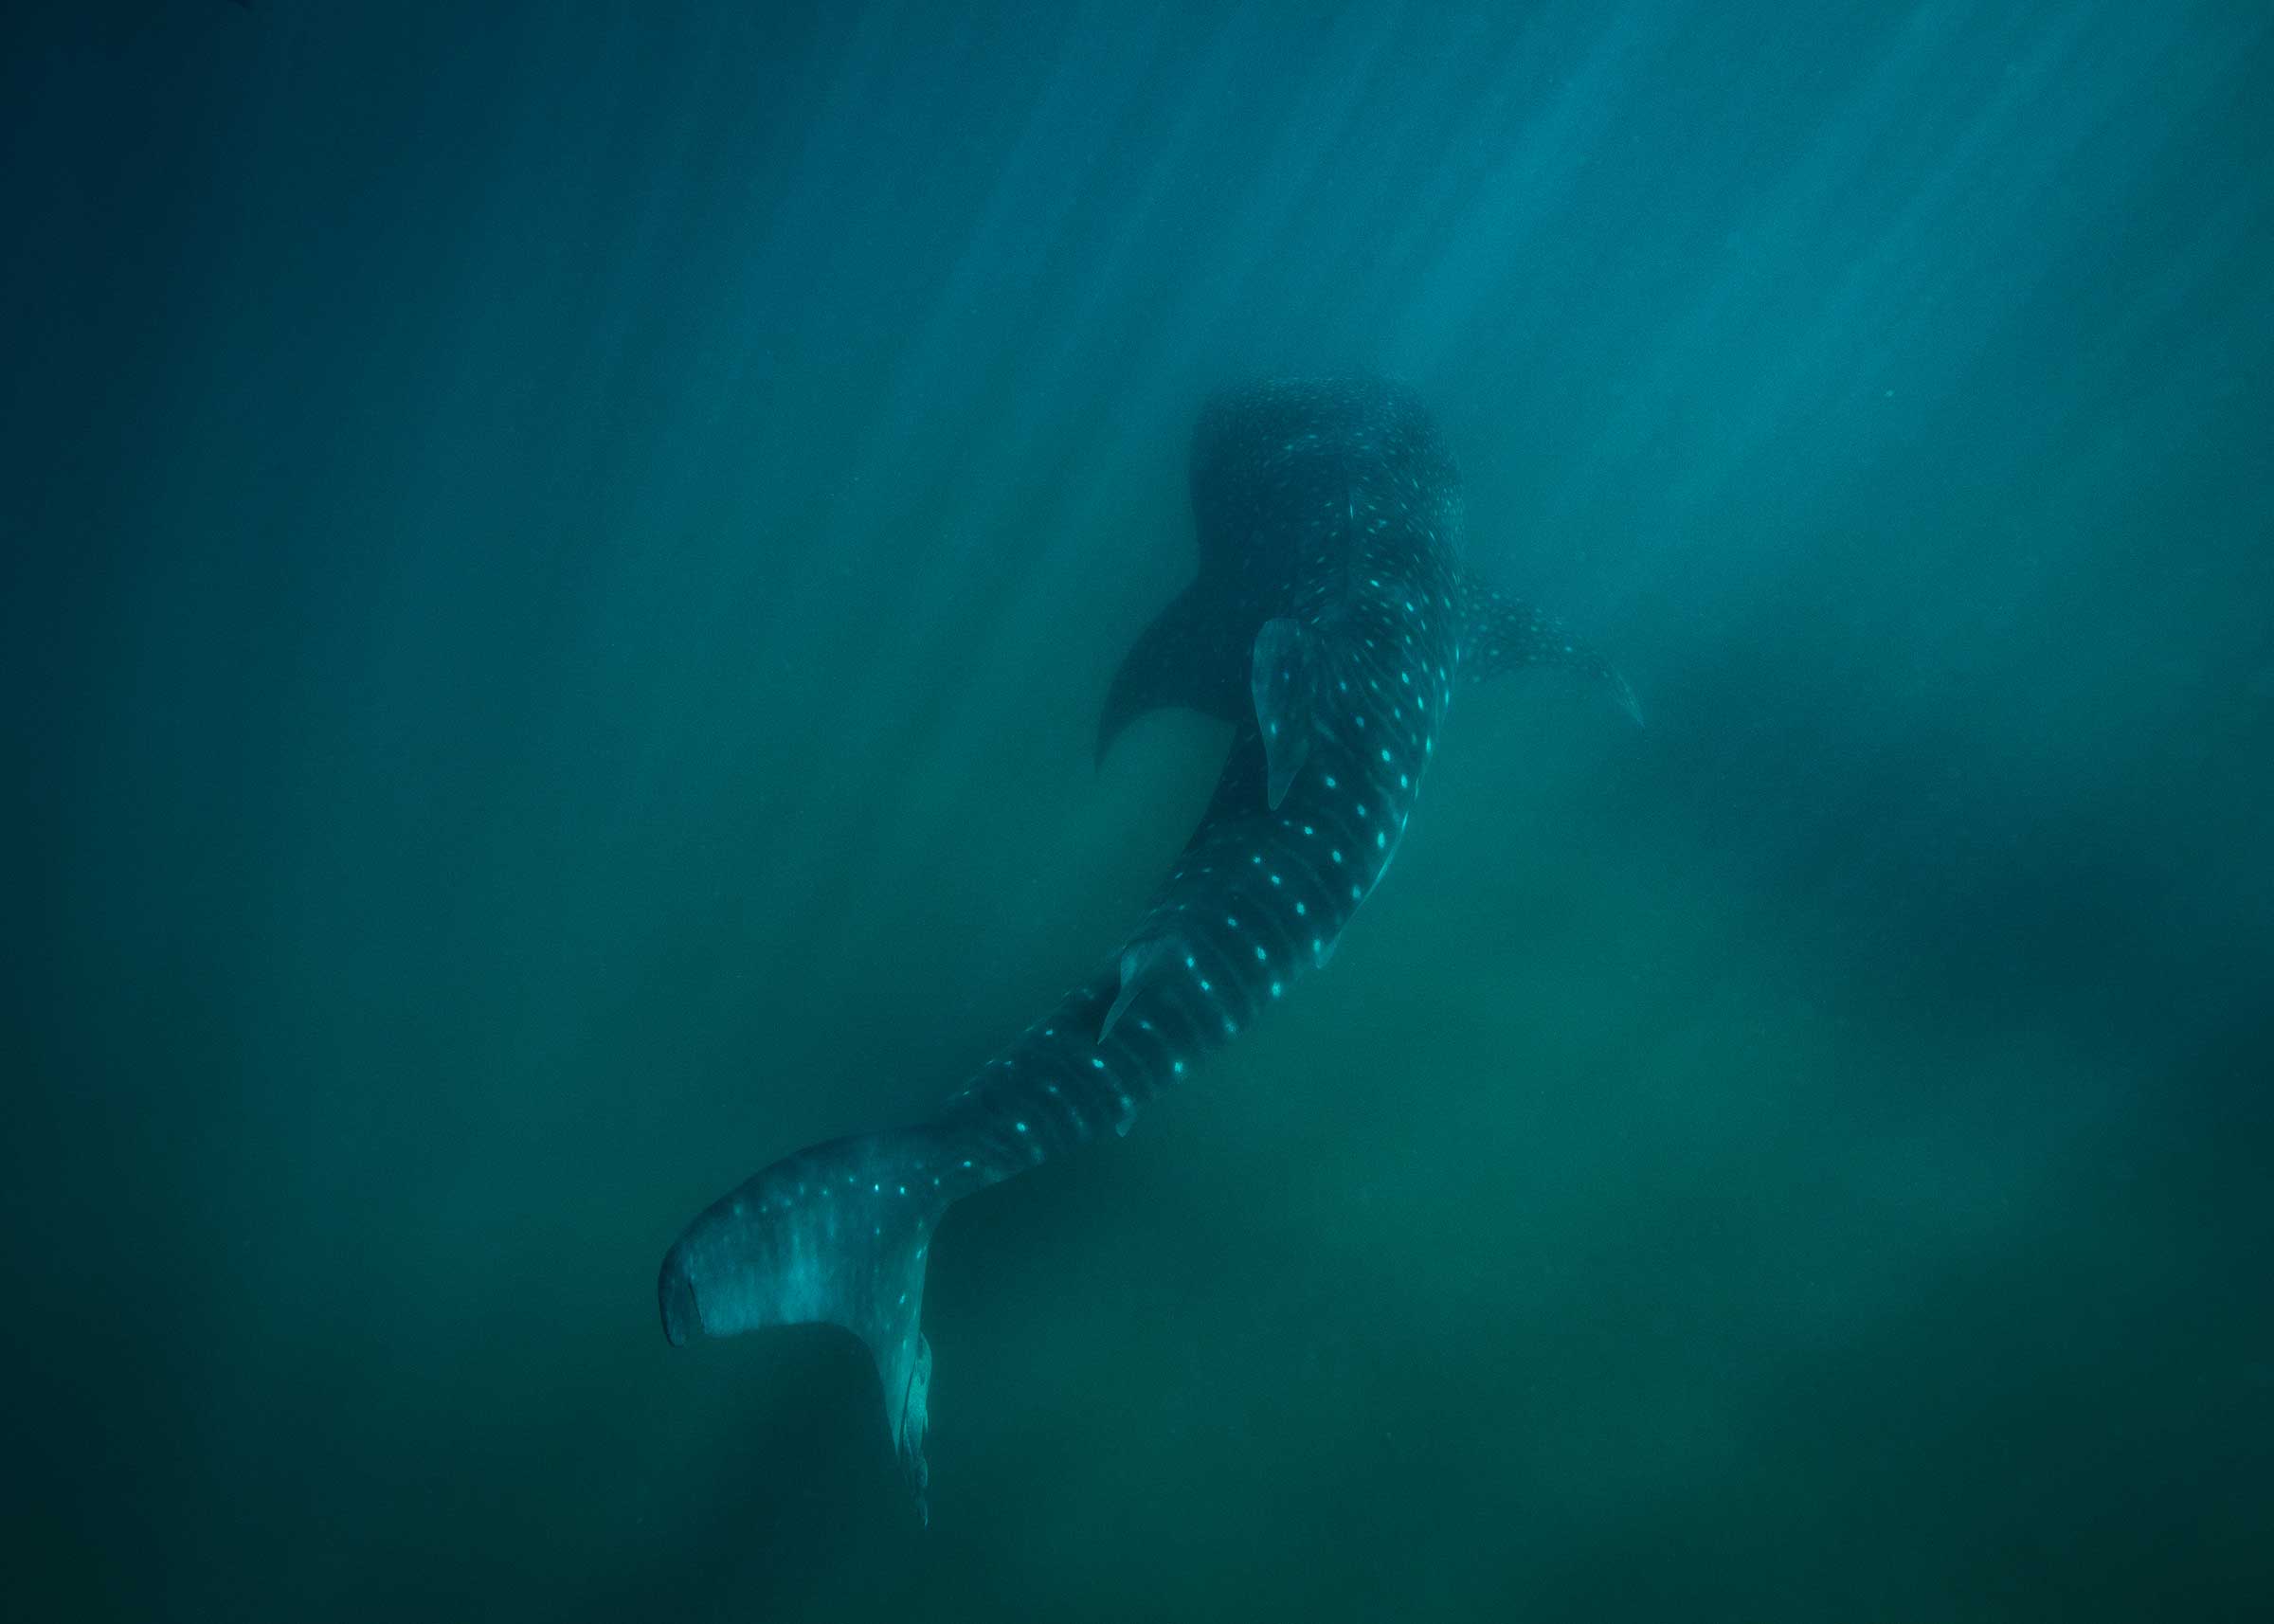 A whale shark in the harbor off La Paz, Mexico. Whale sharks use the shallow waters off La Paz as a feeding ground.  As the city has grown, ship traffic has increased and has exposed these peaceful creatures to ship strikes. Today, the city of La Paz is facing pressure to construct a cruise ship port, which would greatly impact the survival of these whale sharks as well as the migration of other important species such as blue whales. (Cristina Mittermeier—SeaLegacy)